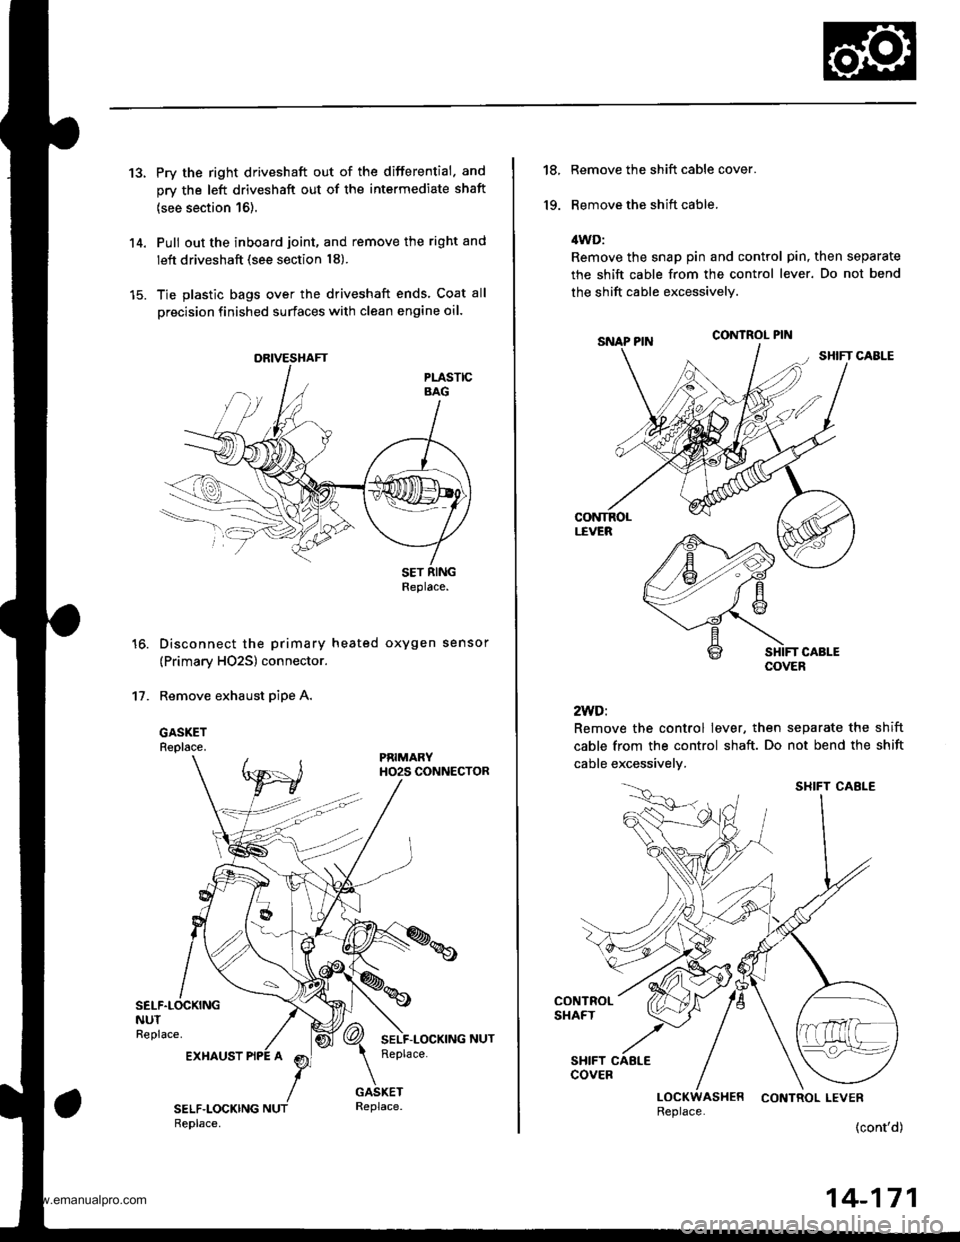 HONDA CR-V 1999 RD1-RD3 / 1.G Service Manual 
13.Pry the right driveshaft out of the differential. and
orv the left driveshaft out of the intermediate shaft
{see section 16).
Pull out the inboard joint, and remove the right and
left driveshaft (